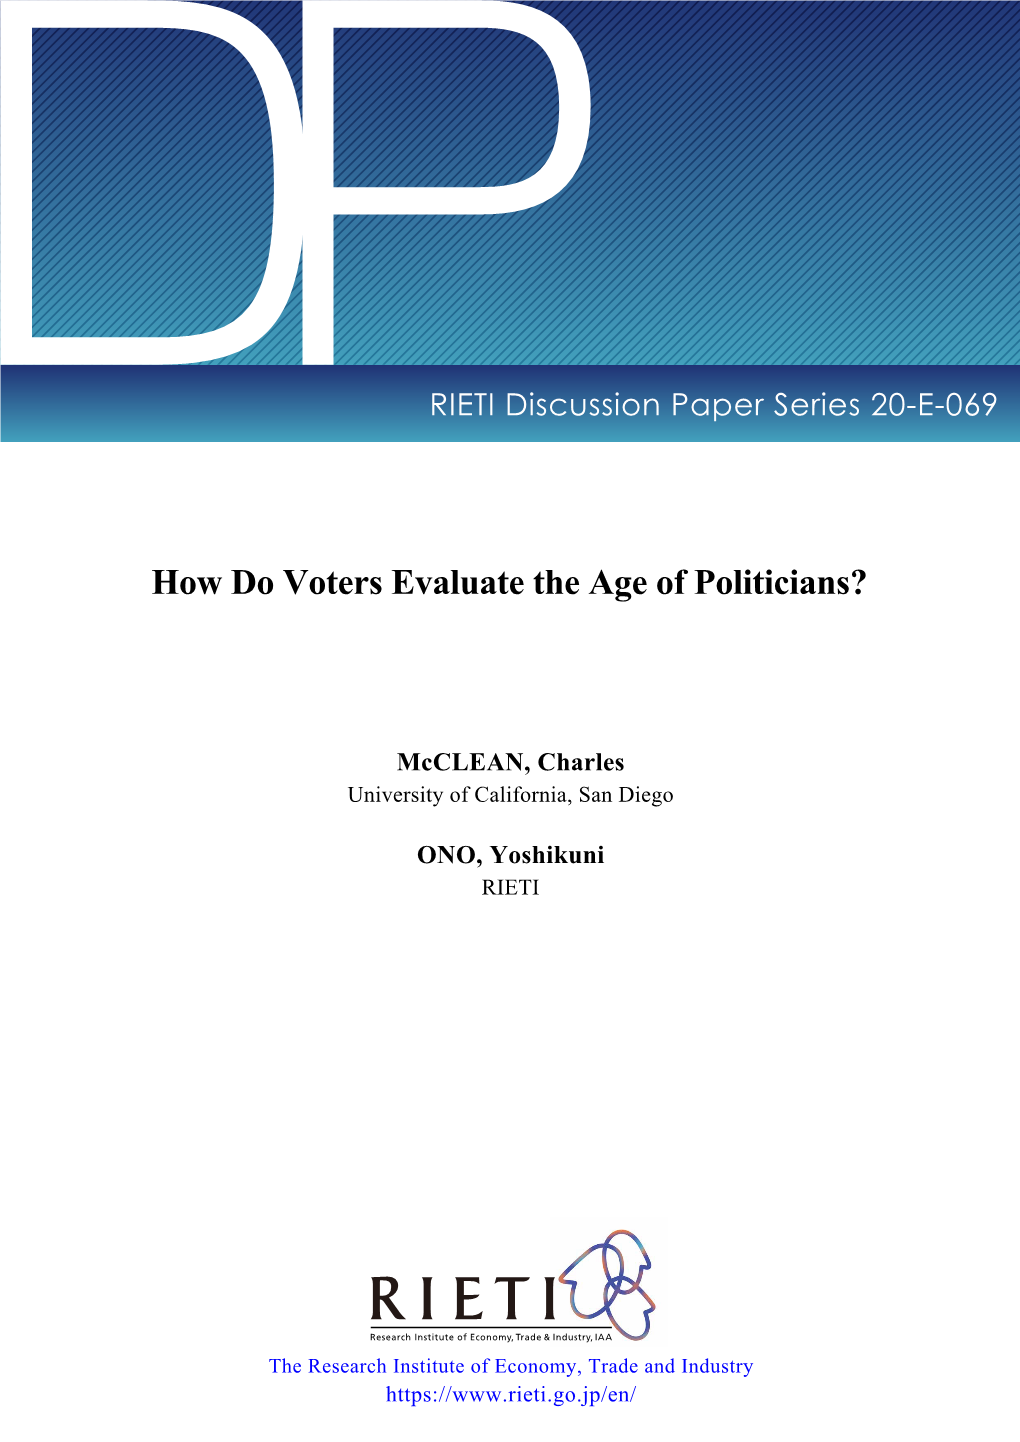 How Do Voters Evaluate the Age of Politicians?